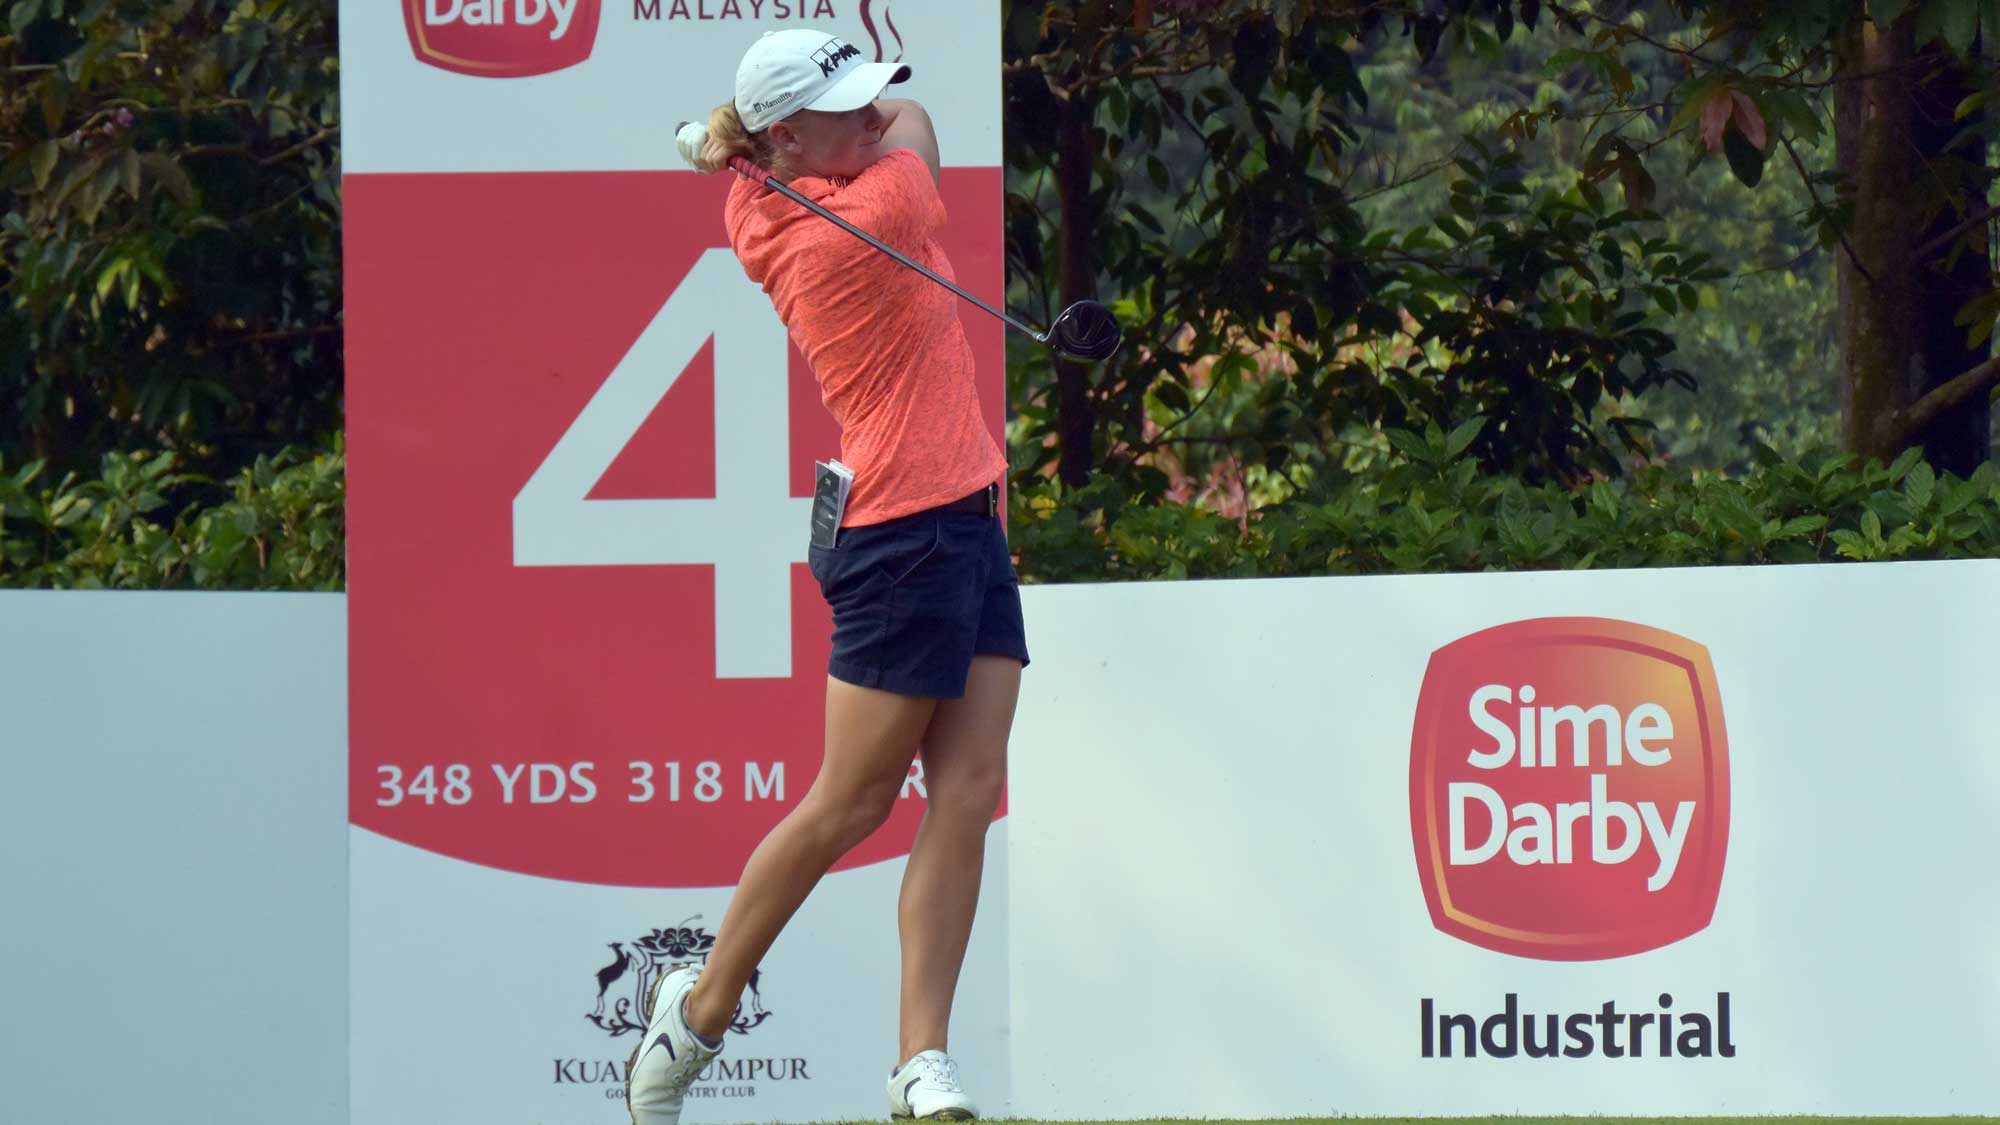 Stacy Lewis of USA watches her tee shot on the 4th hole during round three of the Sime Darby LPGA Tour at Kuala Lumpur Golf & Country Club